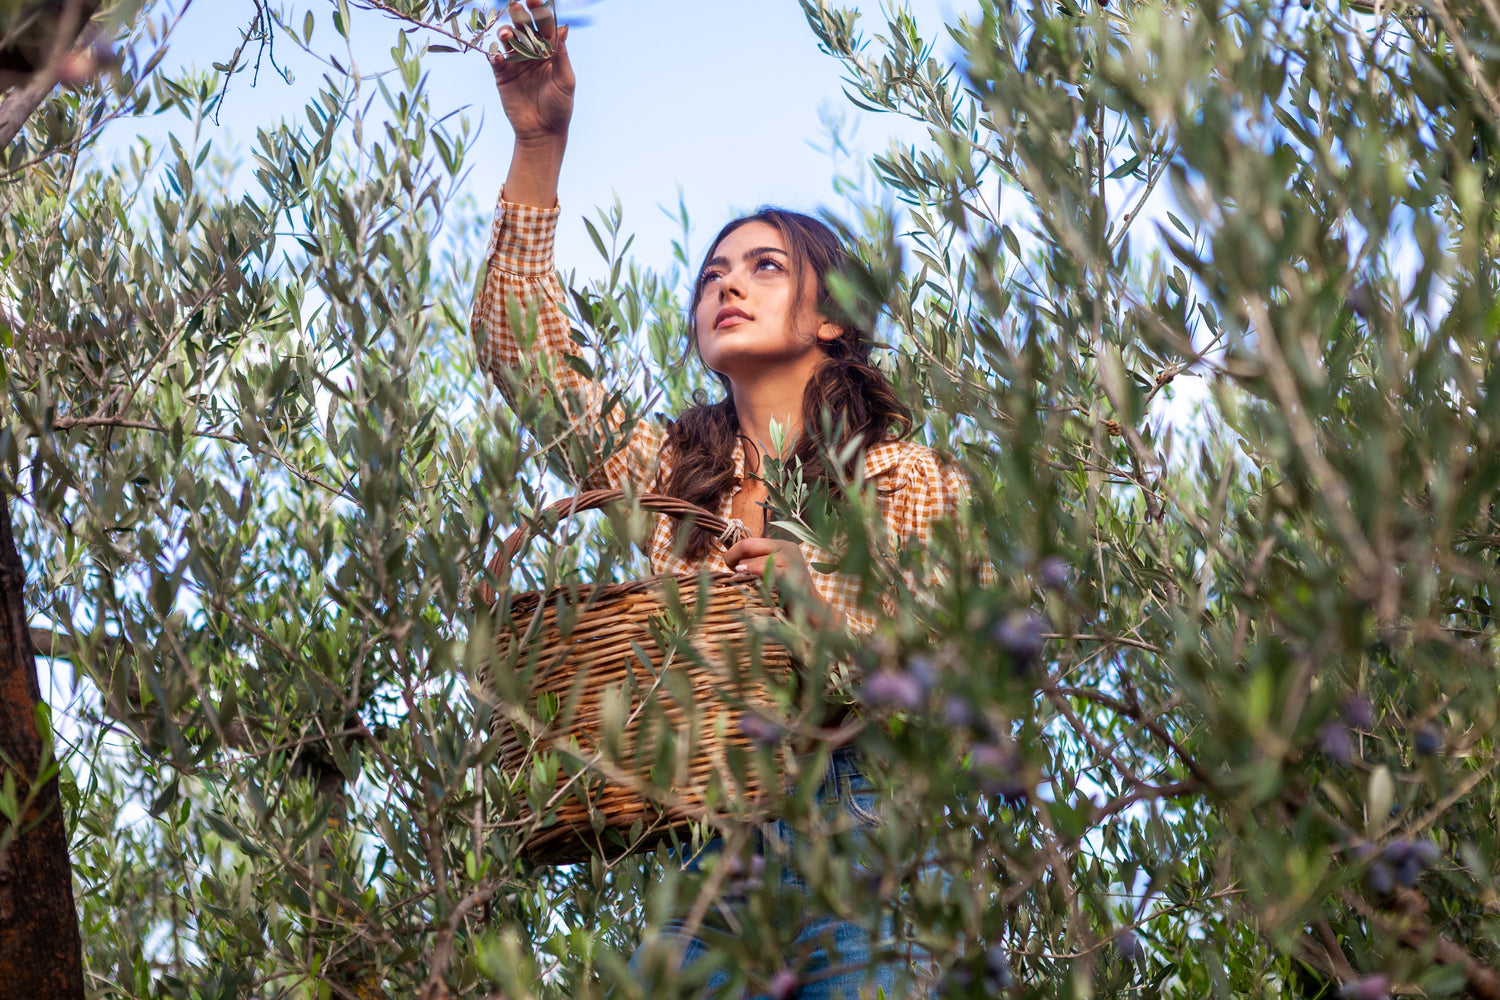 Female (Anna Kostakis) picking olives in Kasandrinos olive field. She is standing in the tree with a woven basket.